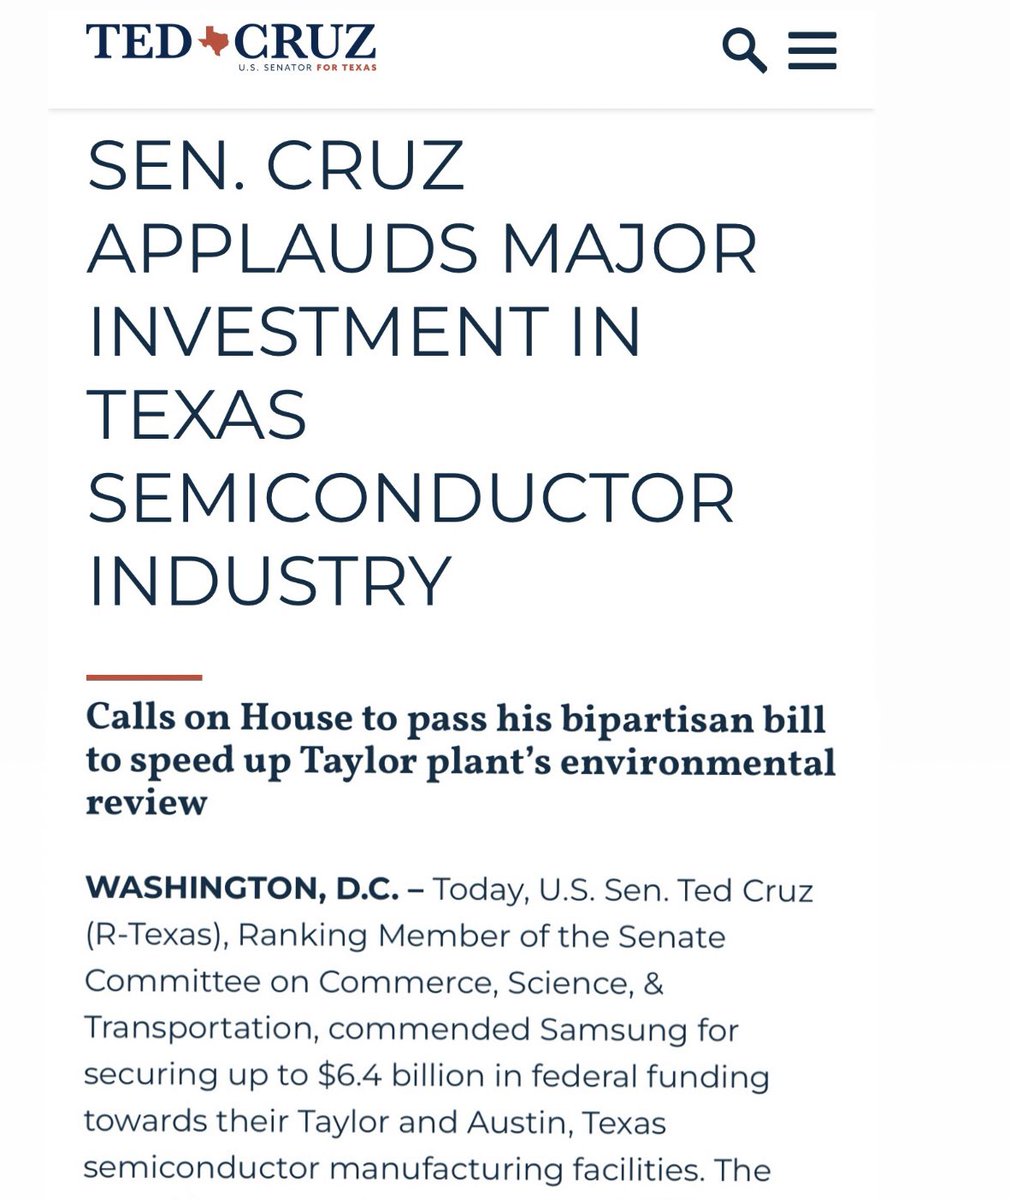 Ted Cruz voted against the bill funding the “major investment” he’s applauding.